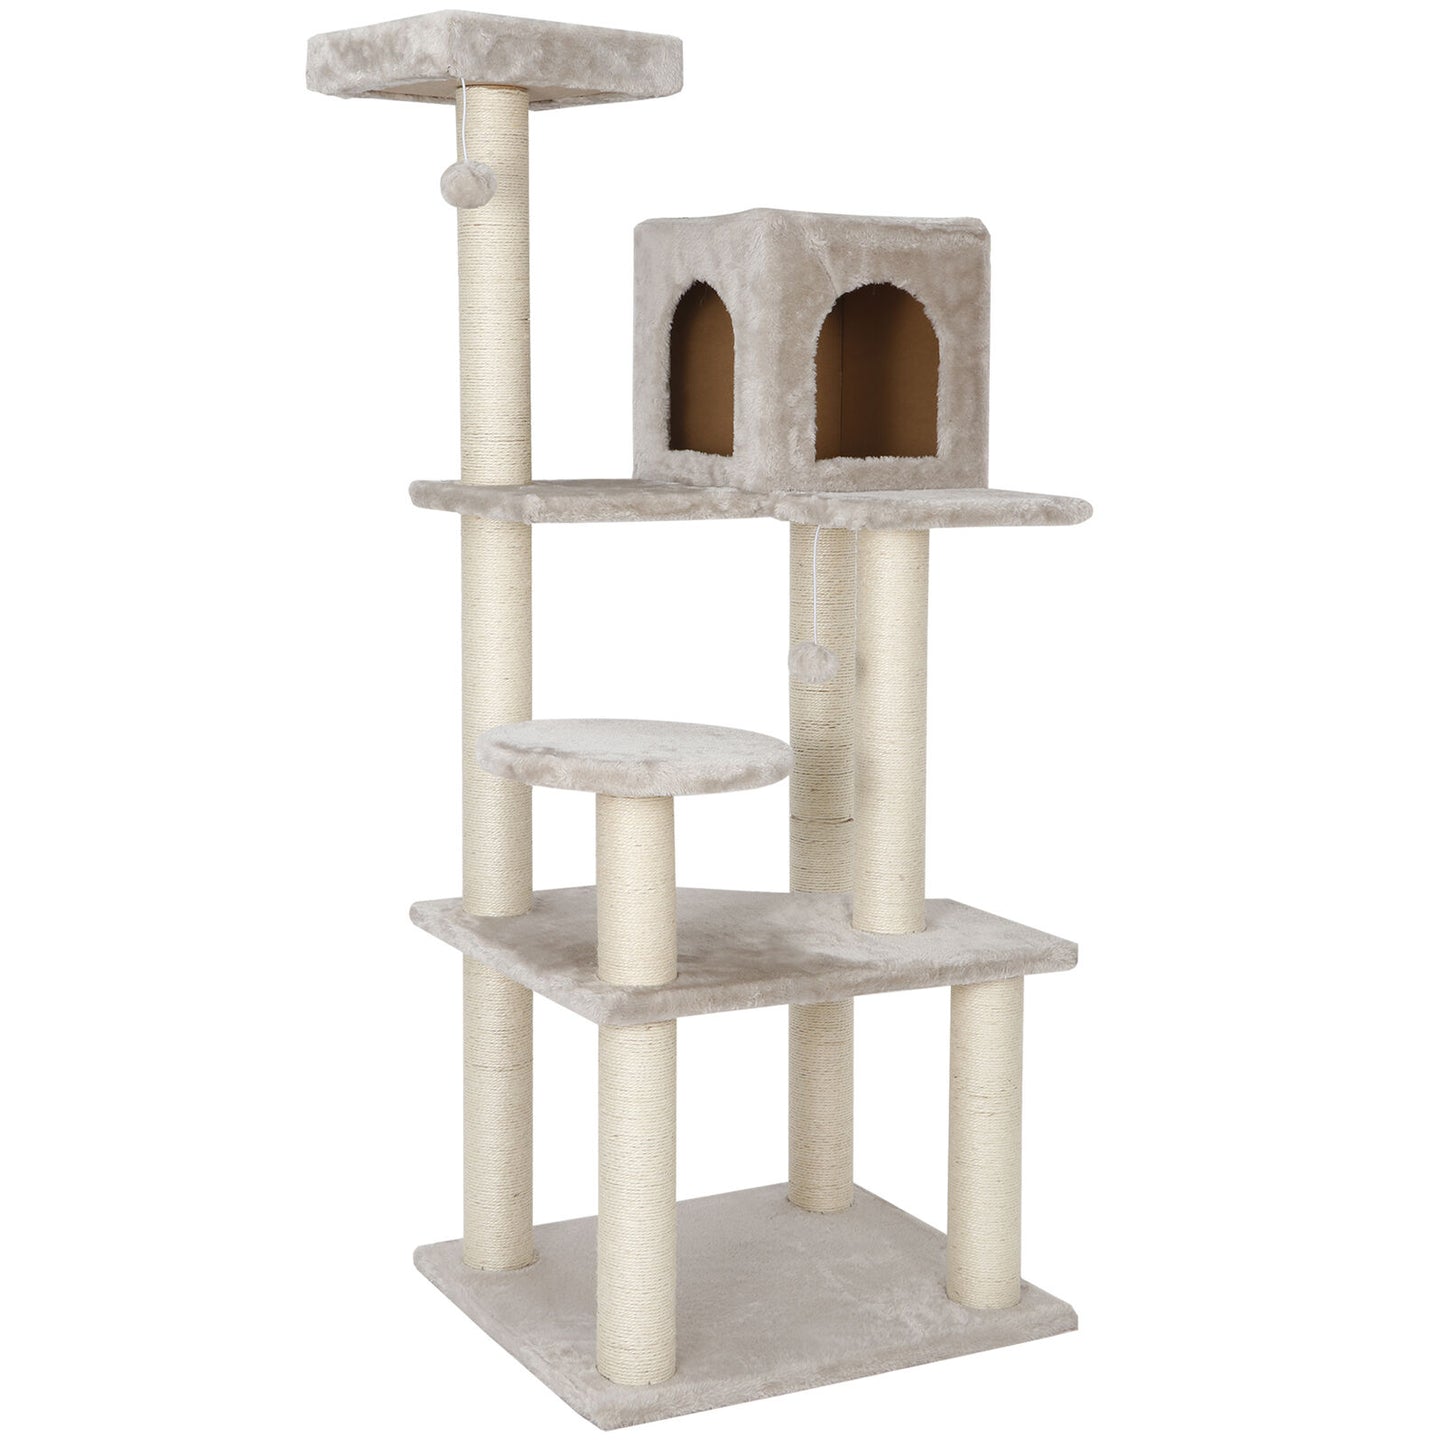 56" Sturdy Cat Tree Condo Tower Pet Large Play House Activity For Rest Beige